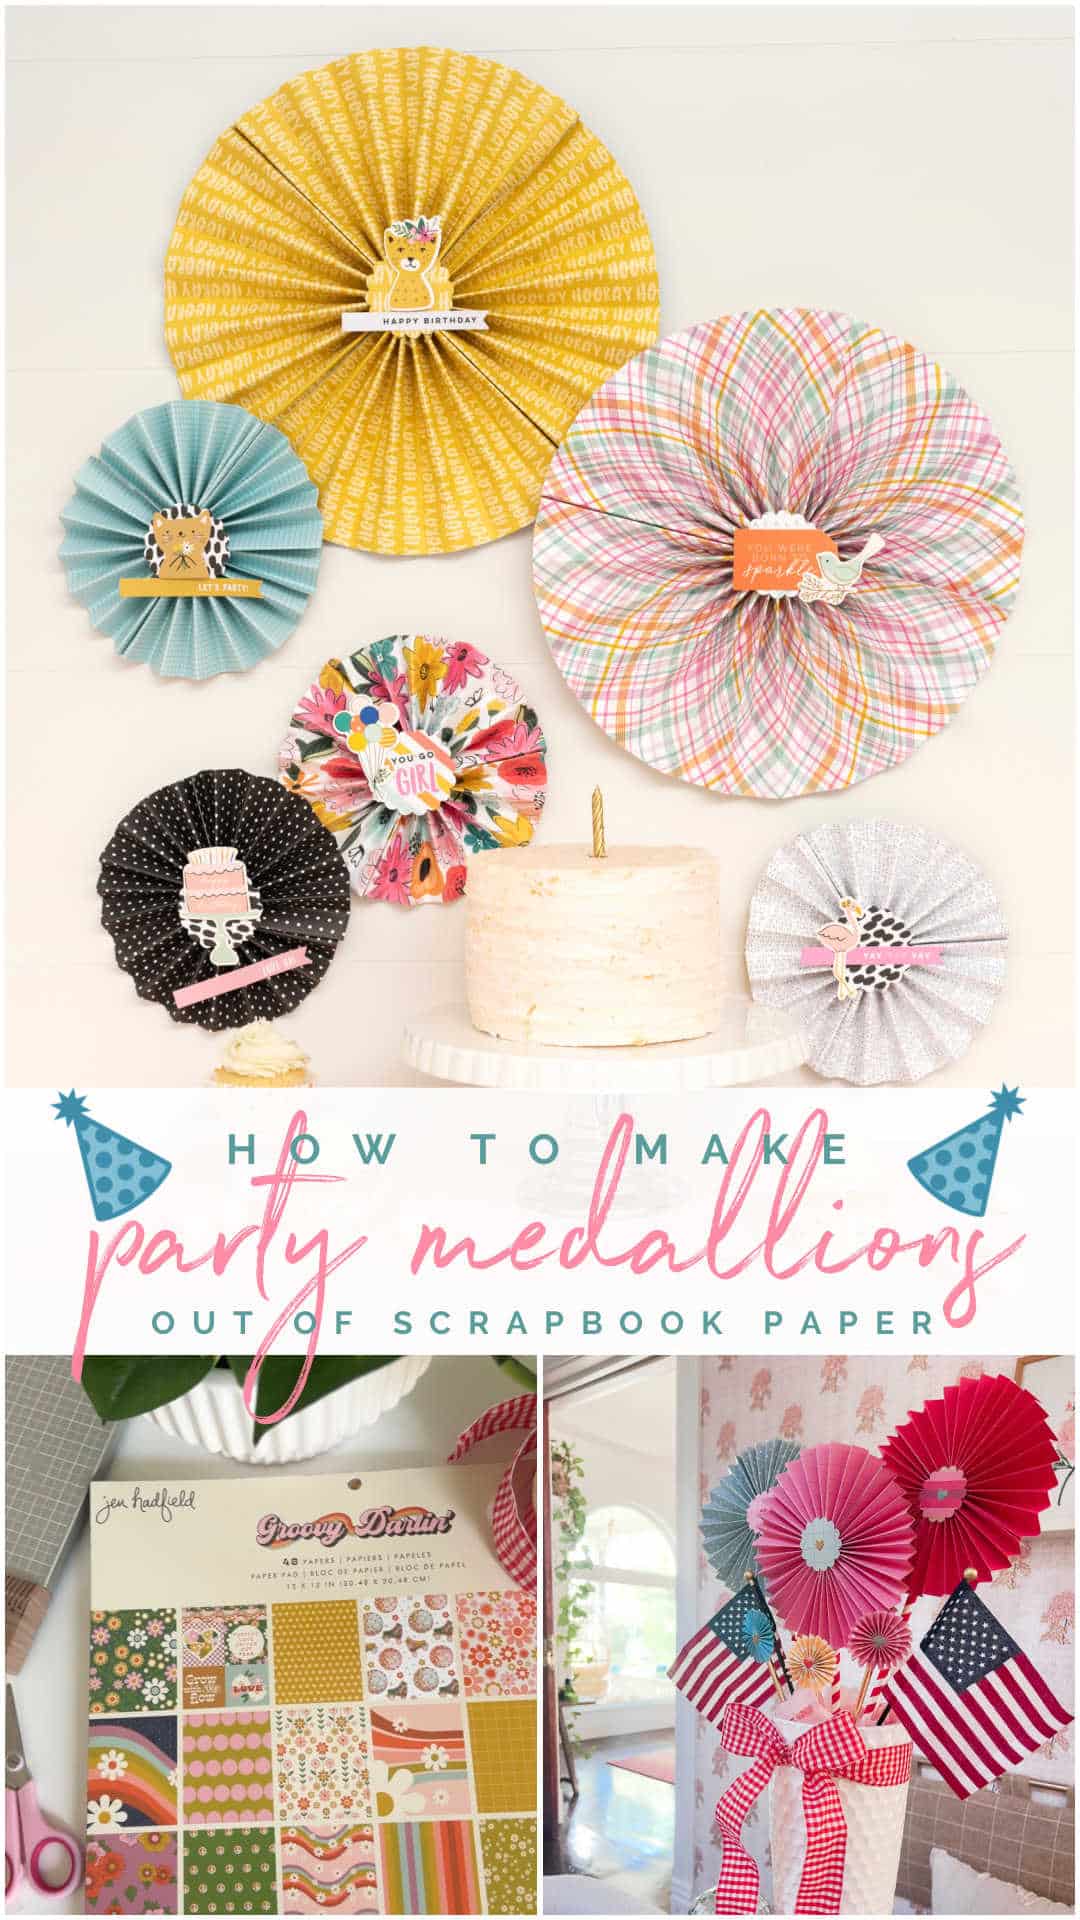 Turn Scrapbook Paper into Party Medallions. Learn how to create versatile and stunning paper medallions using scrapbook paper for festive decorations, perfect for any celebration.